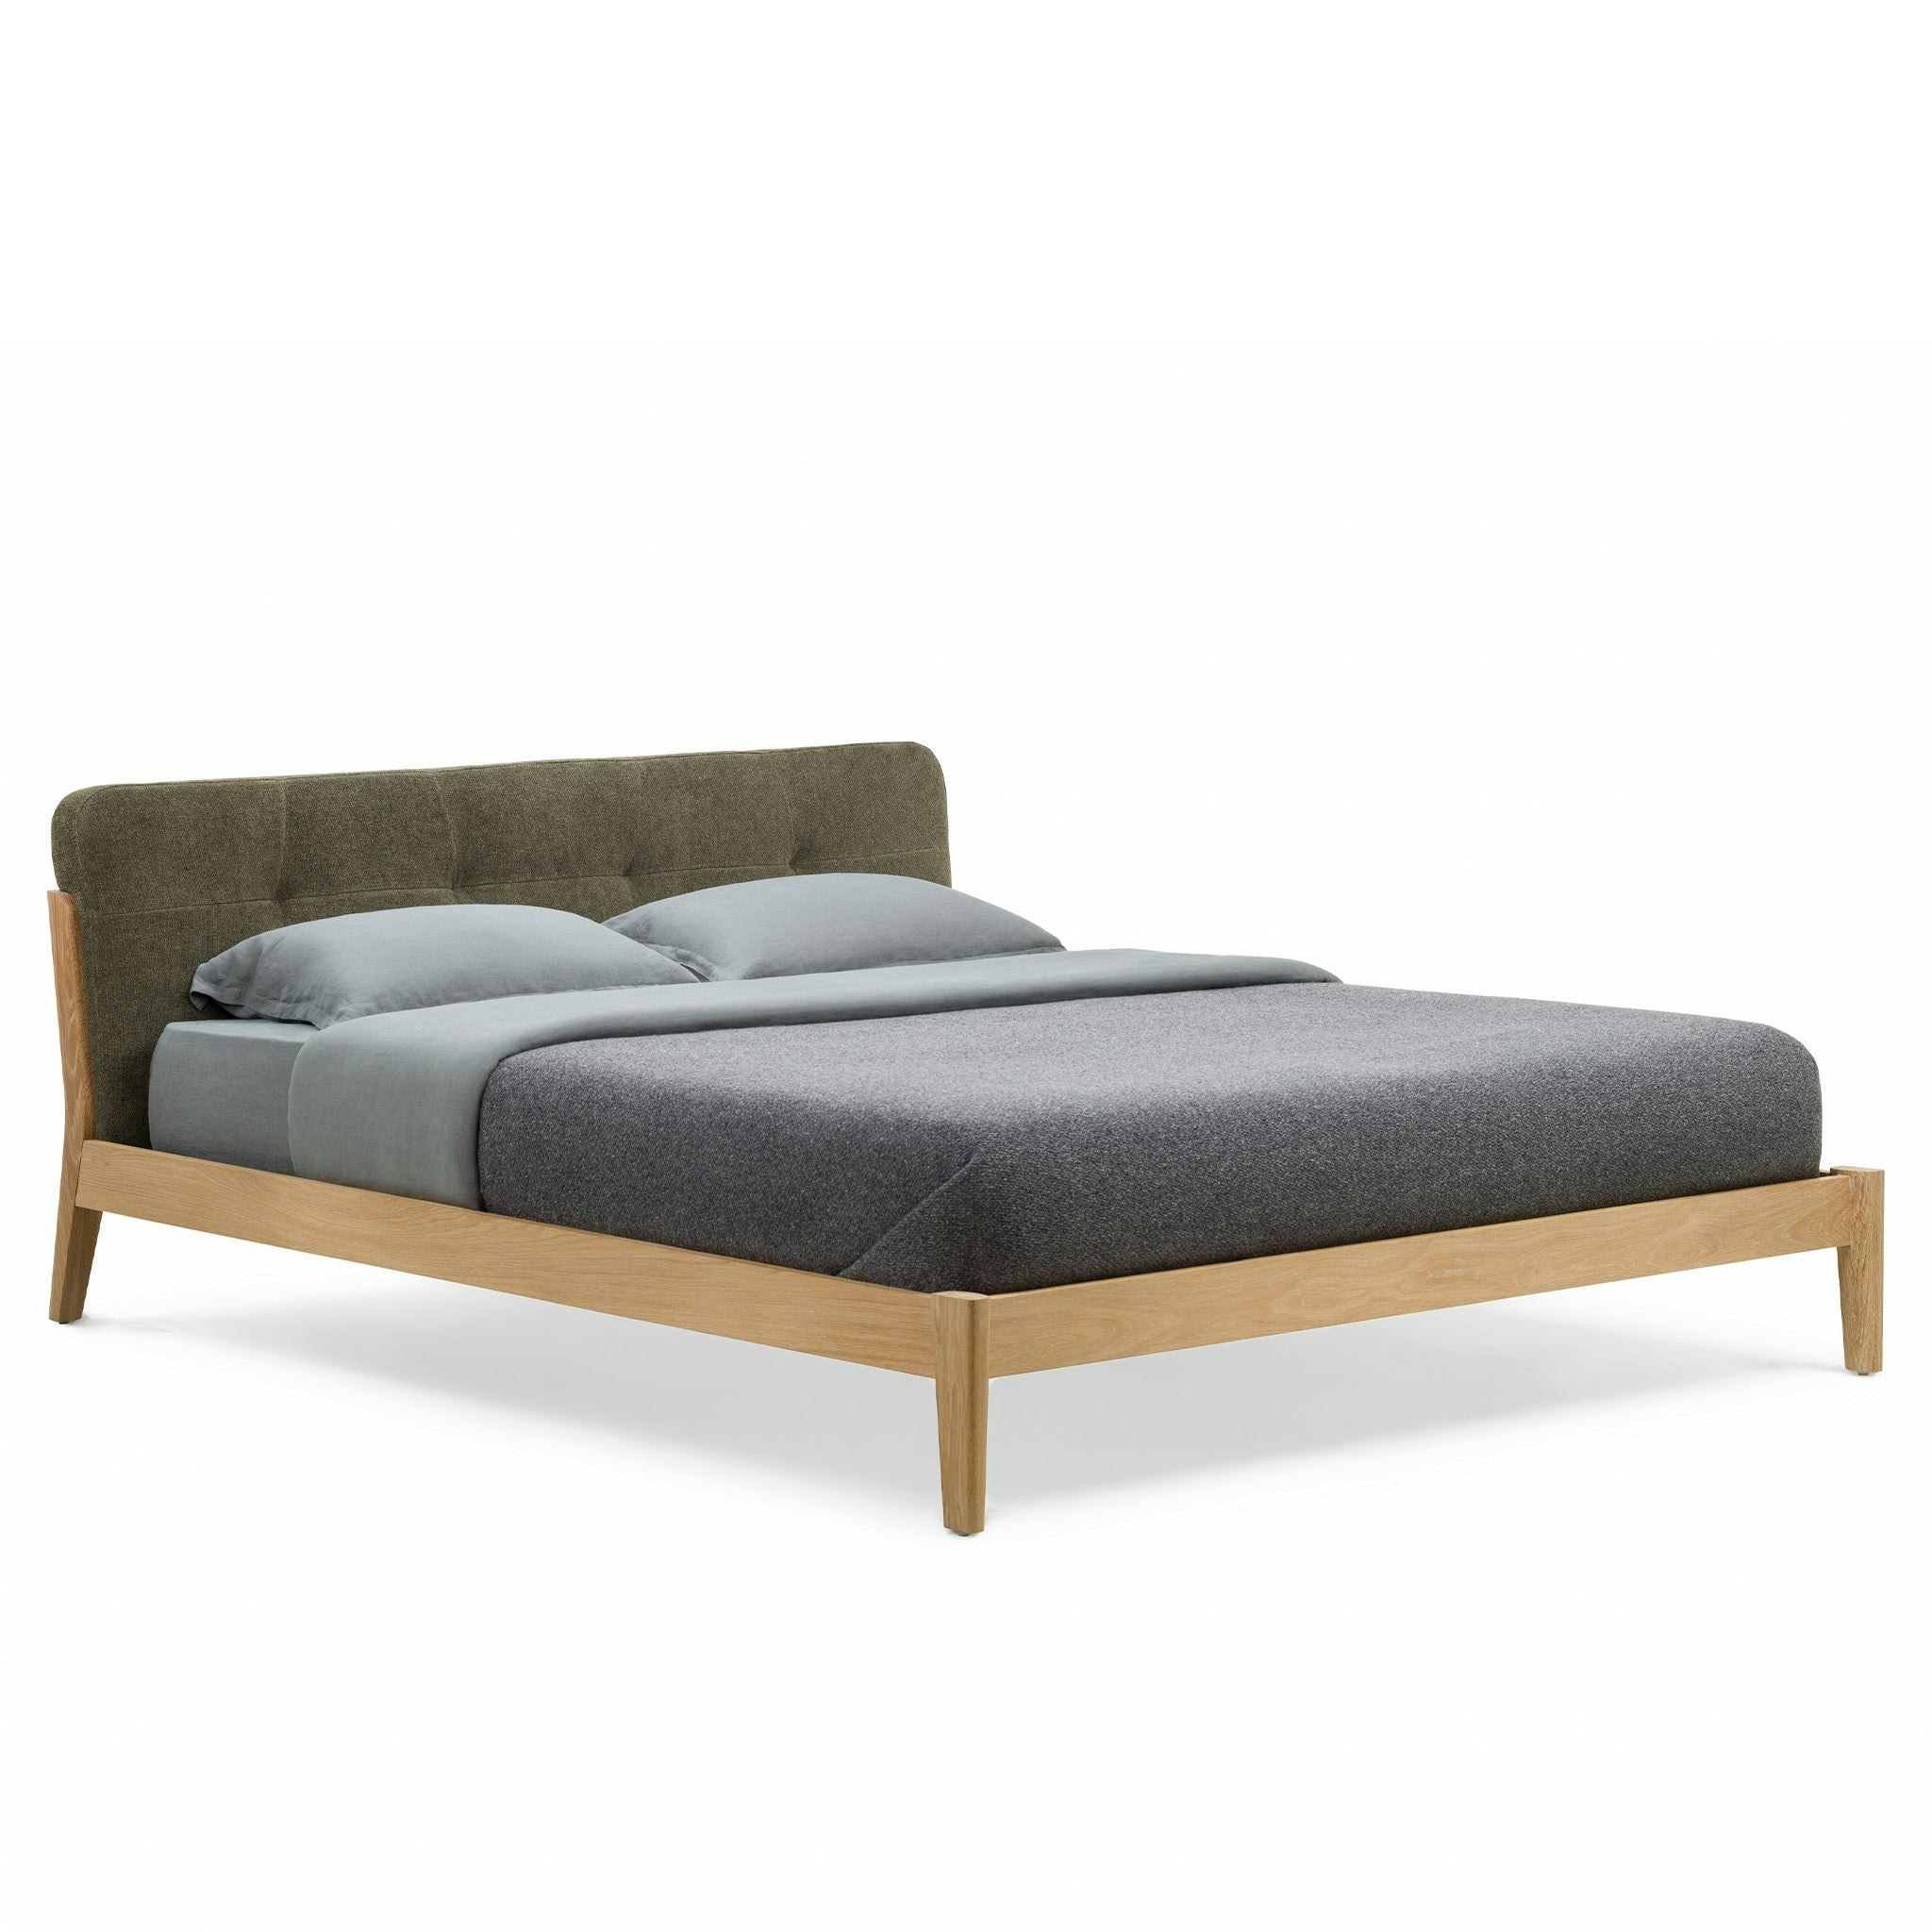 Capo Bed by Neri&Hu